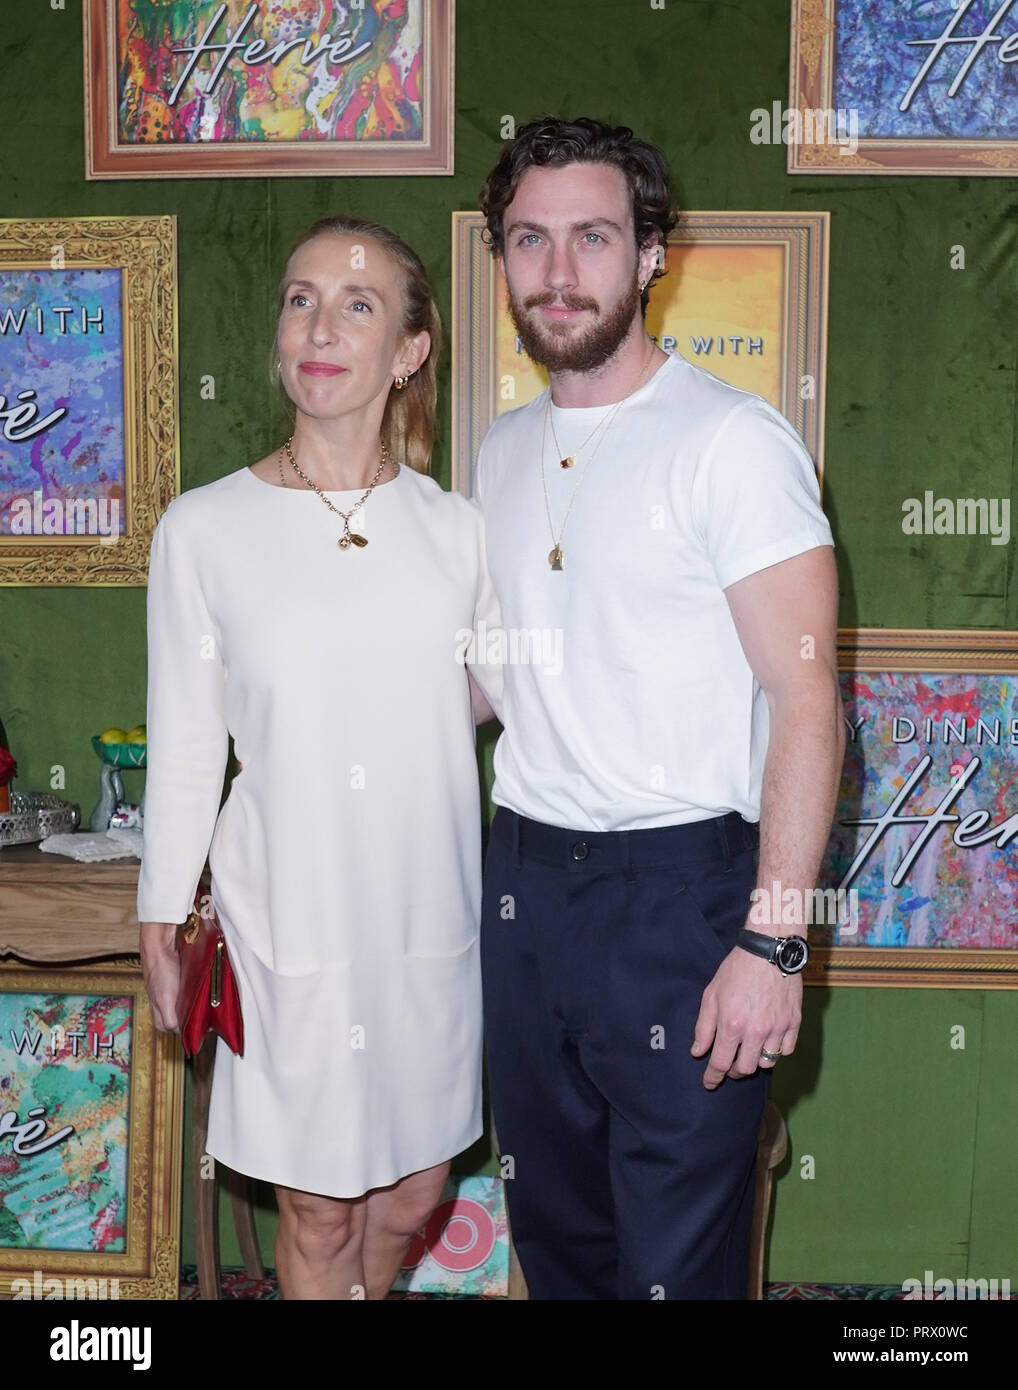 Hollywood, USA. 04th Oct, 2018. Sam Taylor-Johnson and Aaron Taylor-Johnson arrives at the HBO Films' 'My Dinner With Herve' Premiere at Paramount Studios on October 4, 2018 in Hollywood, California. Credit: Image Space/Media Punch/Alamy Live News Stock Photo